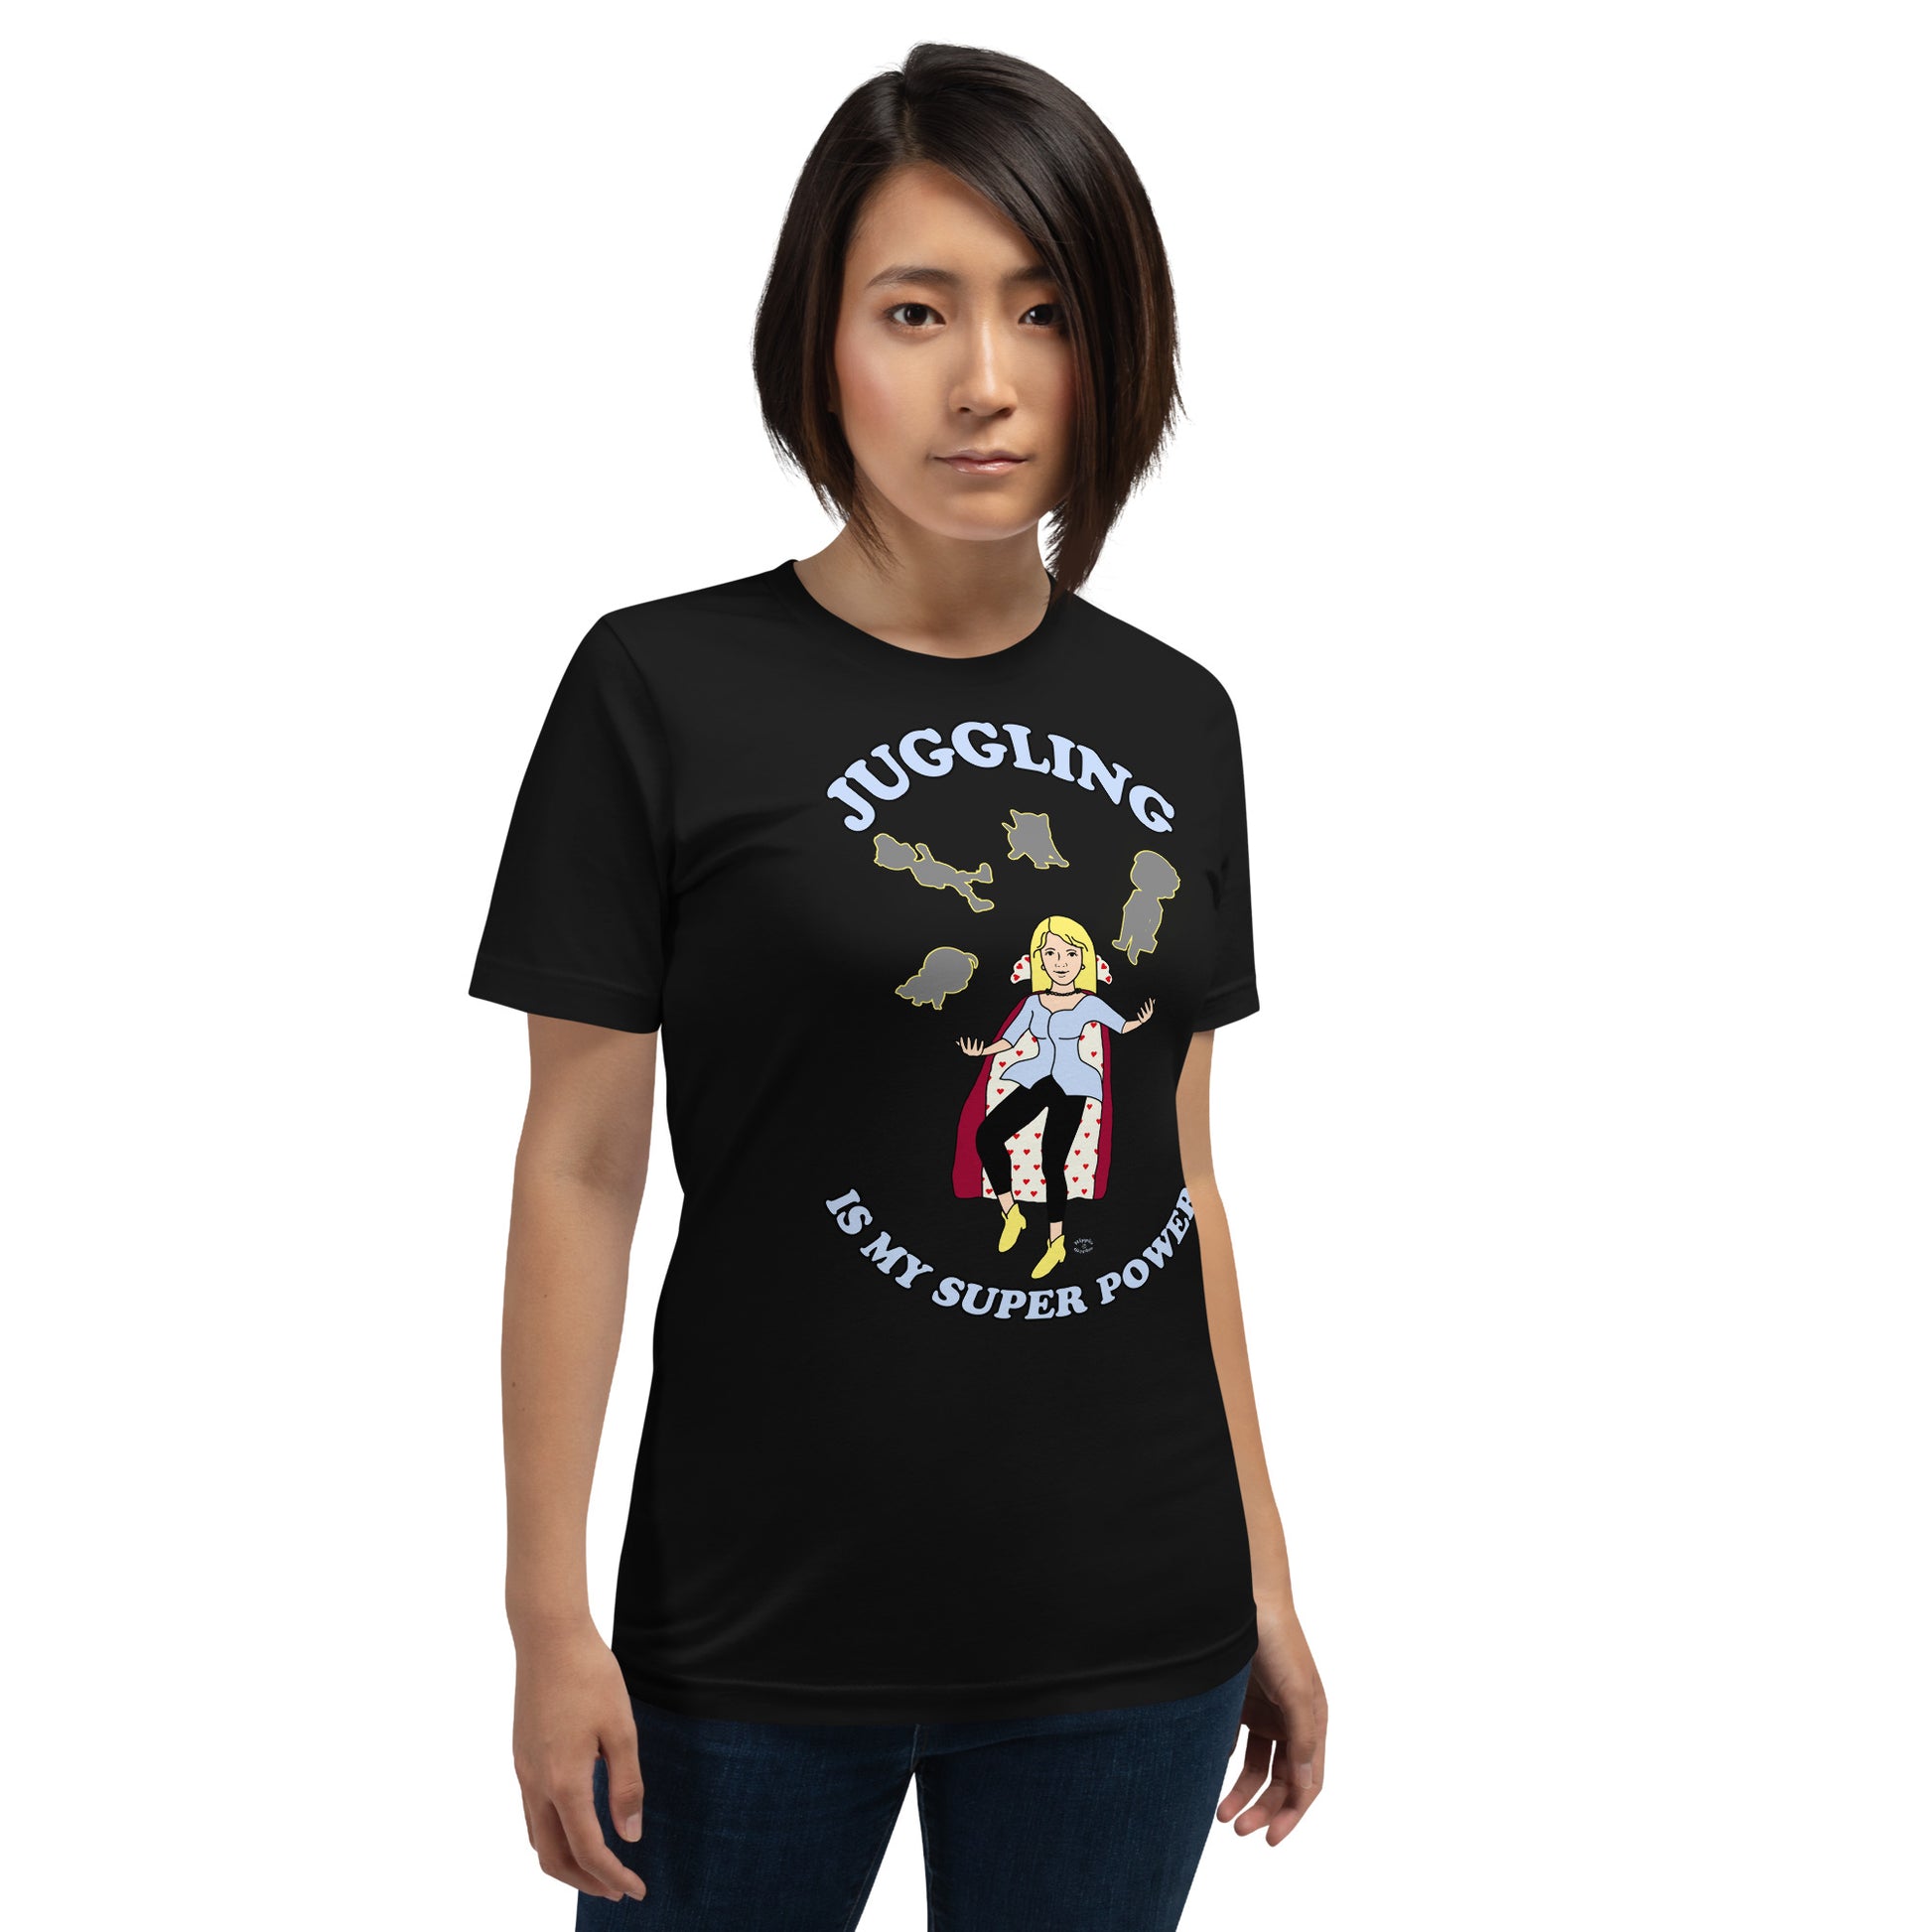 A women wearing a unisex short sleeve tshirt which has on the front a cartoon women in a cape juggling her family like a jester and the text Juggling Is My Super Power - front - black